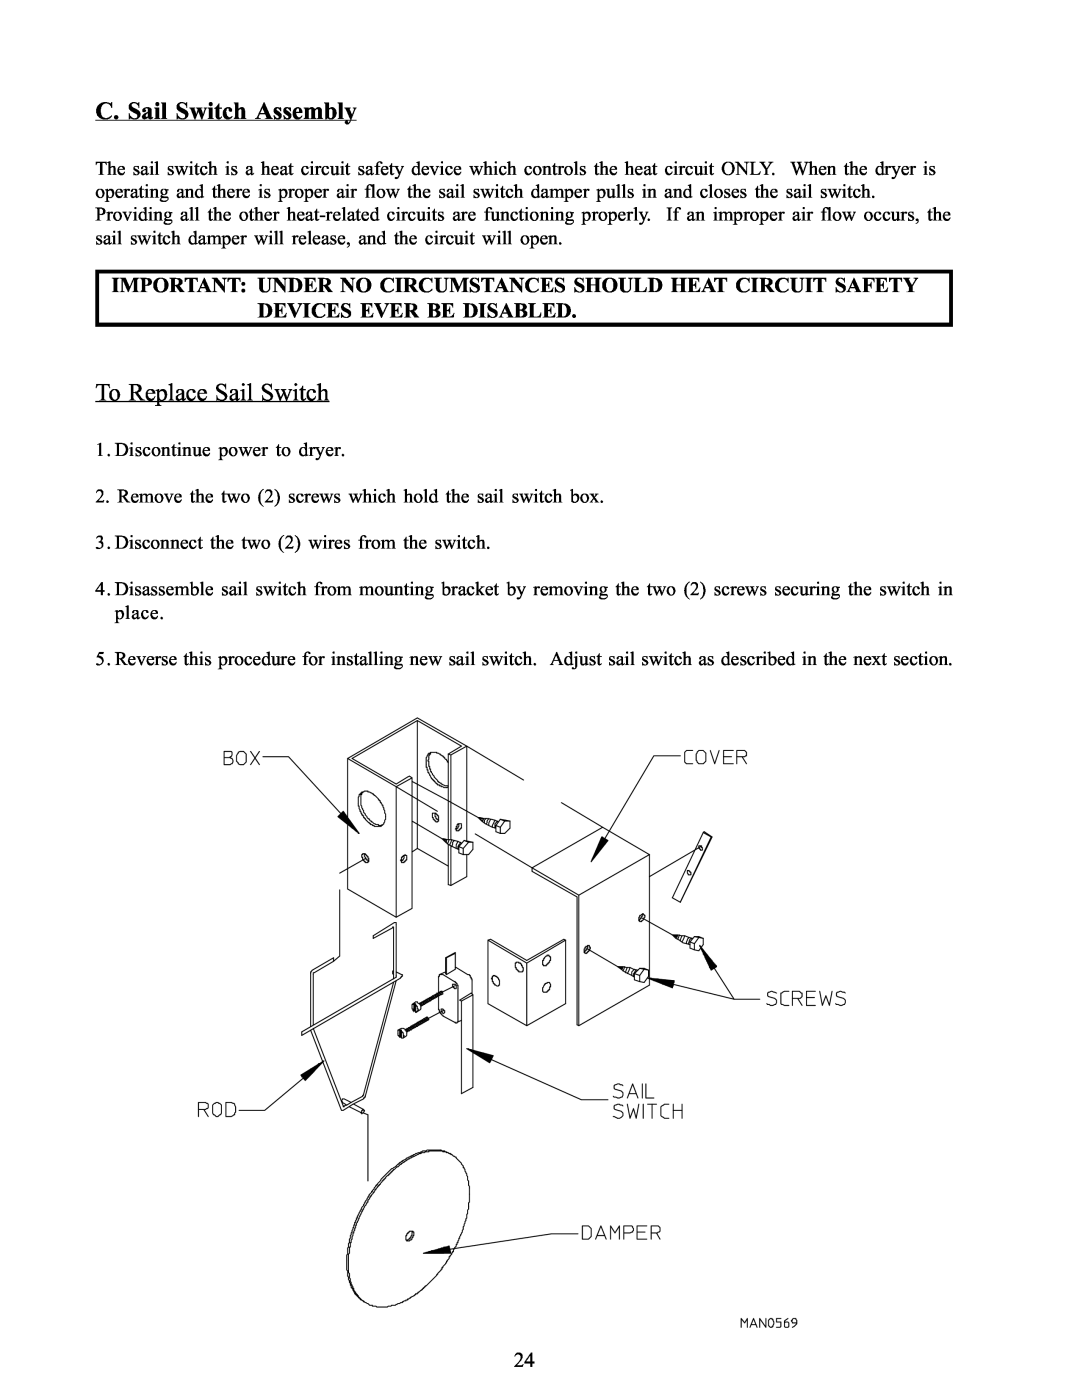 American Dryer Corp WDA-385 service manual C. Sail Switch Assembly, To Replace Sail Switch 